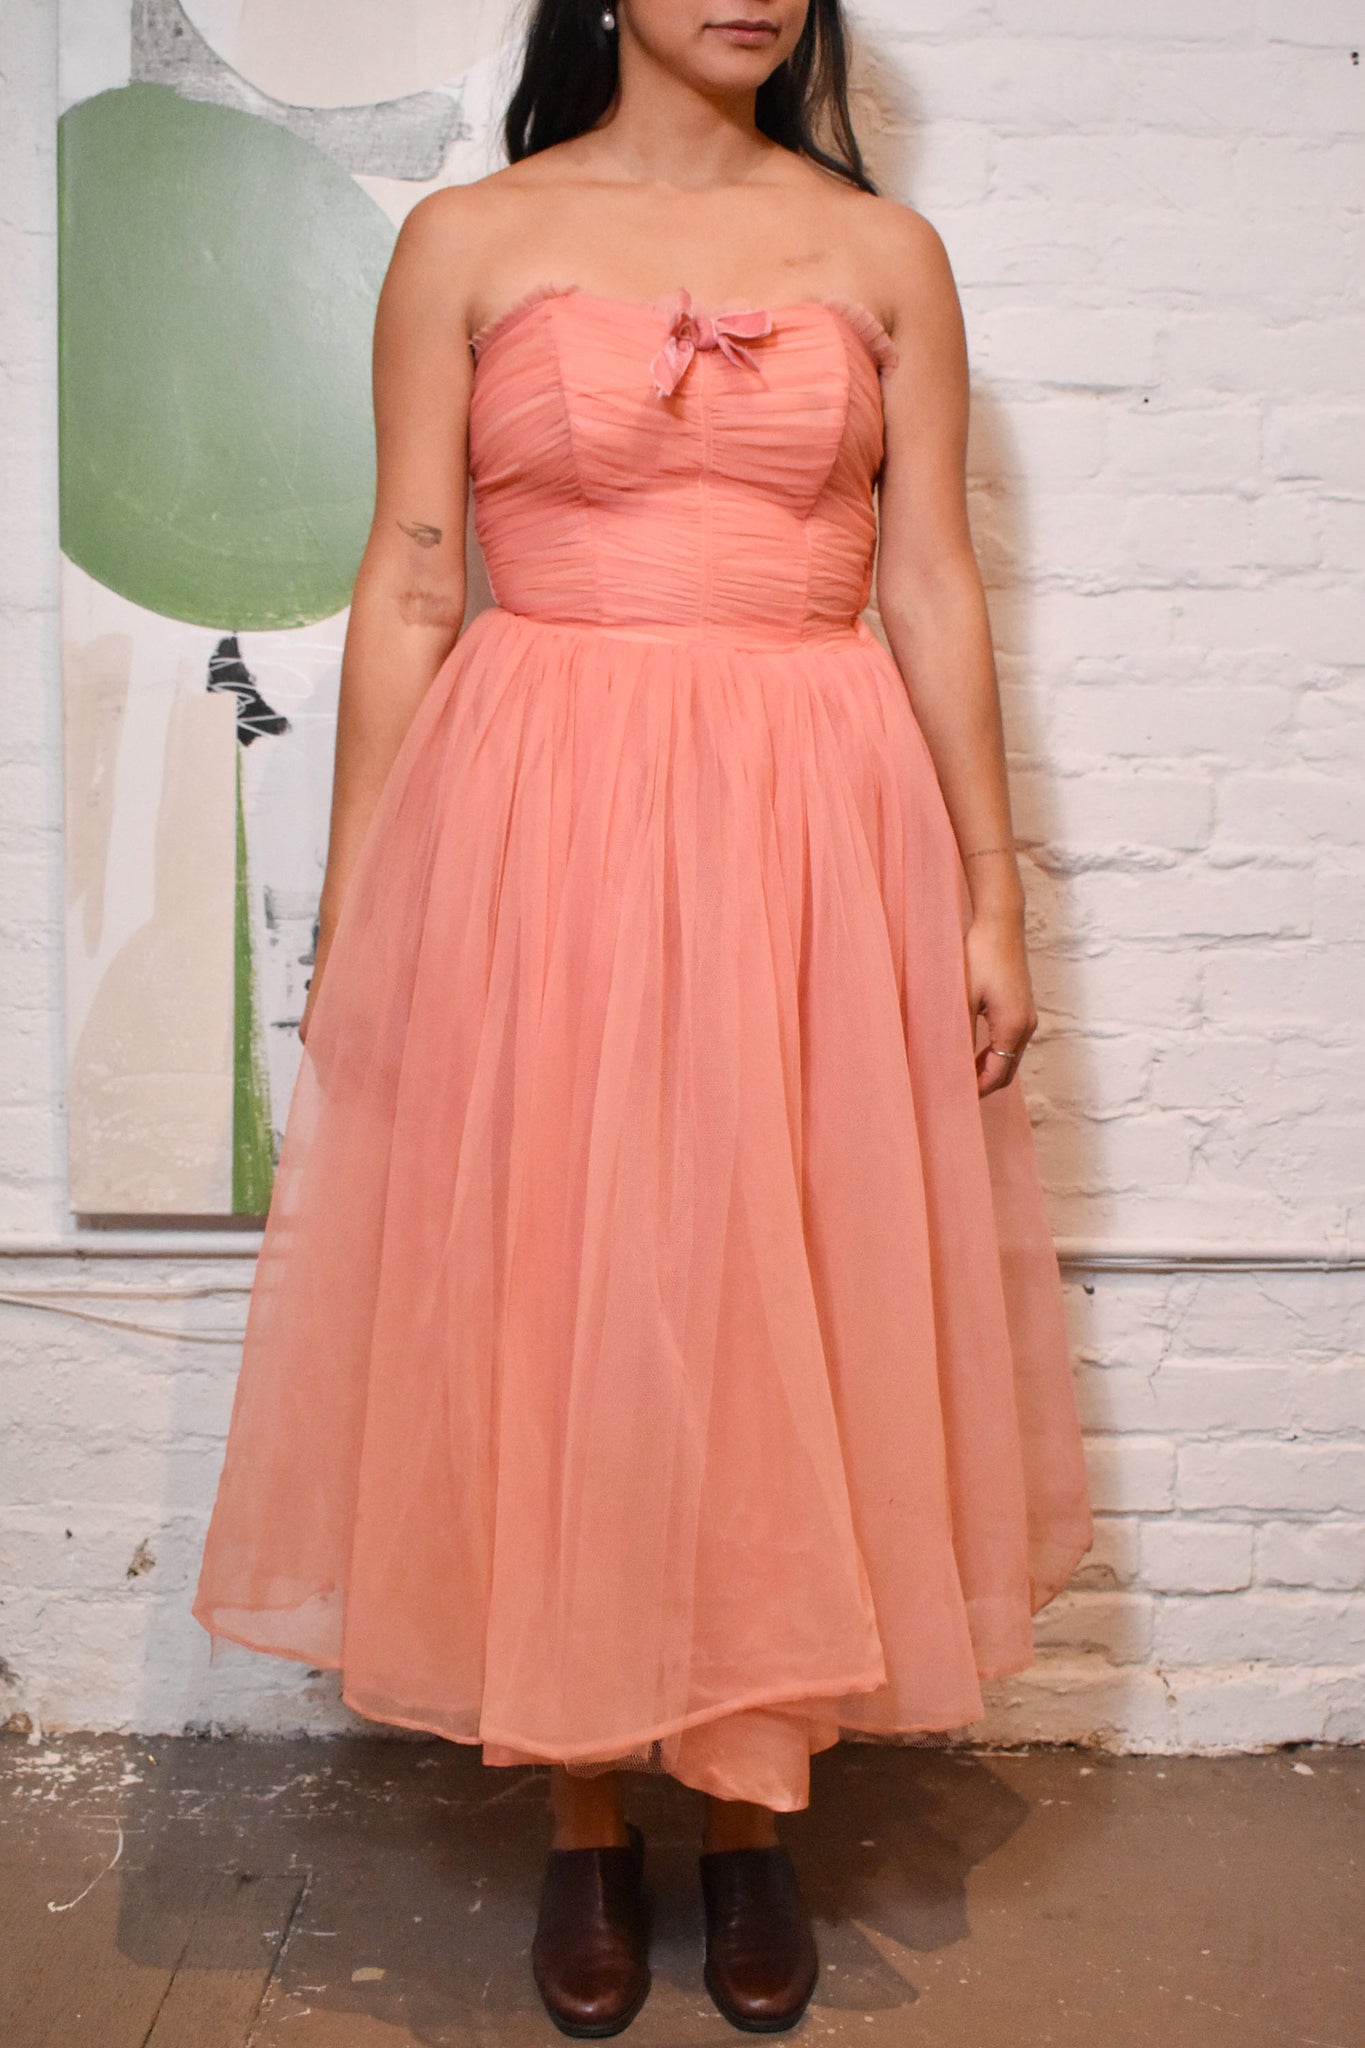 Vintage 1950s Tulle Party Dress